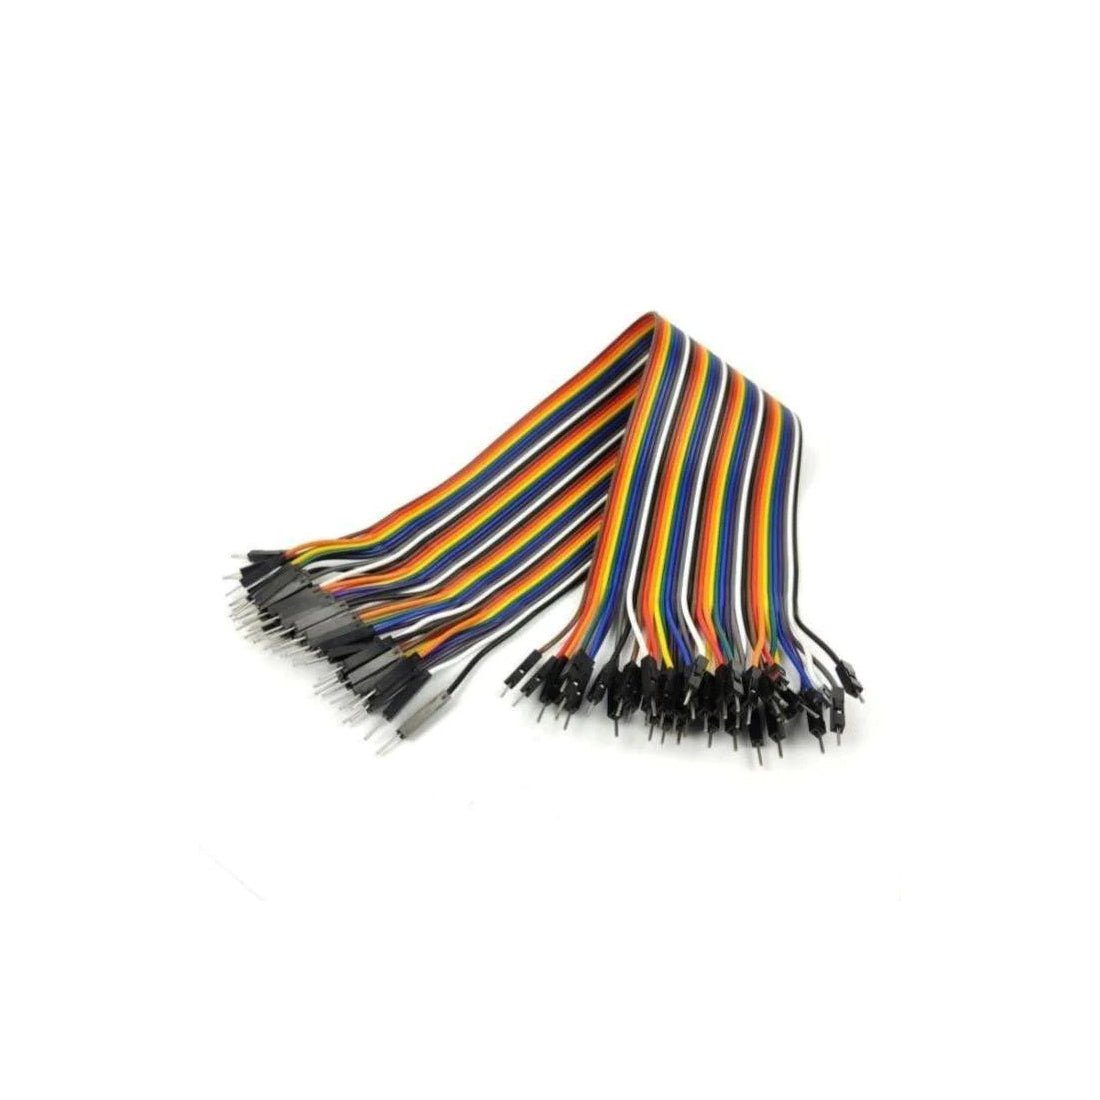 Extra Long Jumper Wires - Male to Male (40 Pack) - أكسسوارات - Store 974 | ستور ٩٧٤